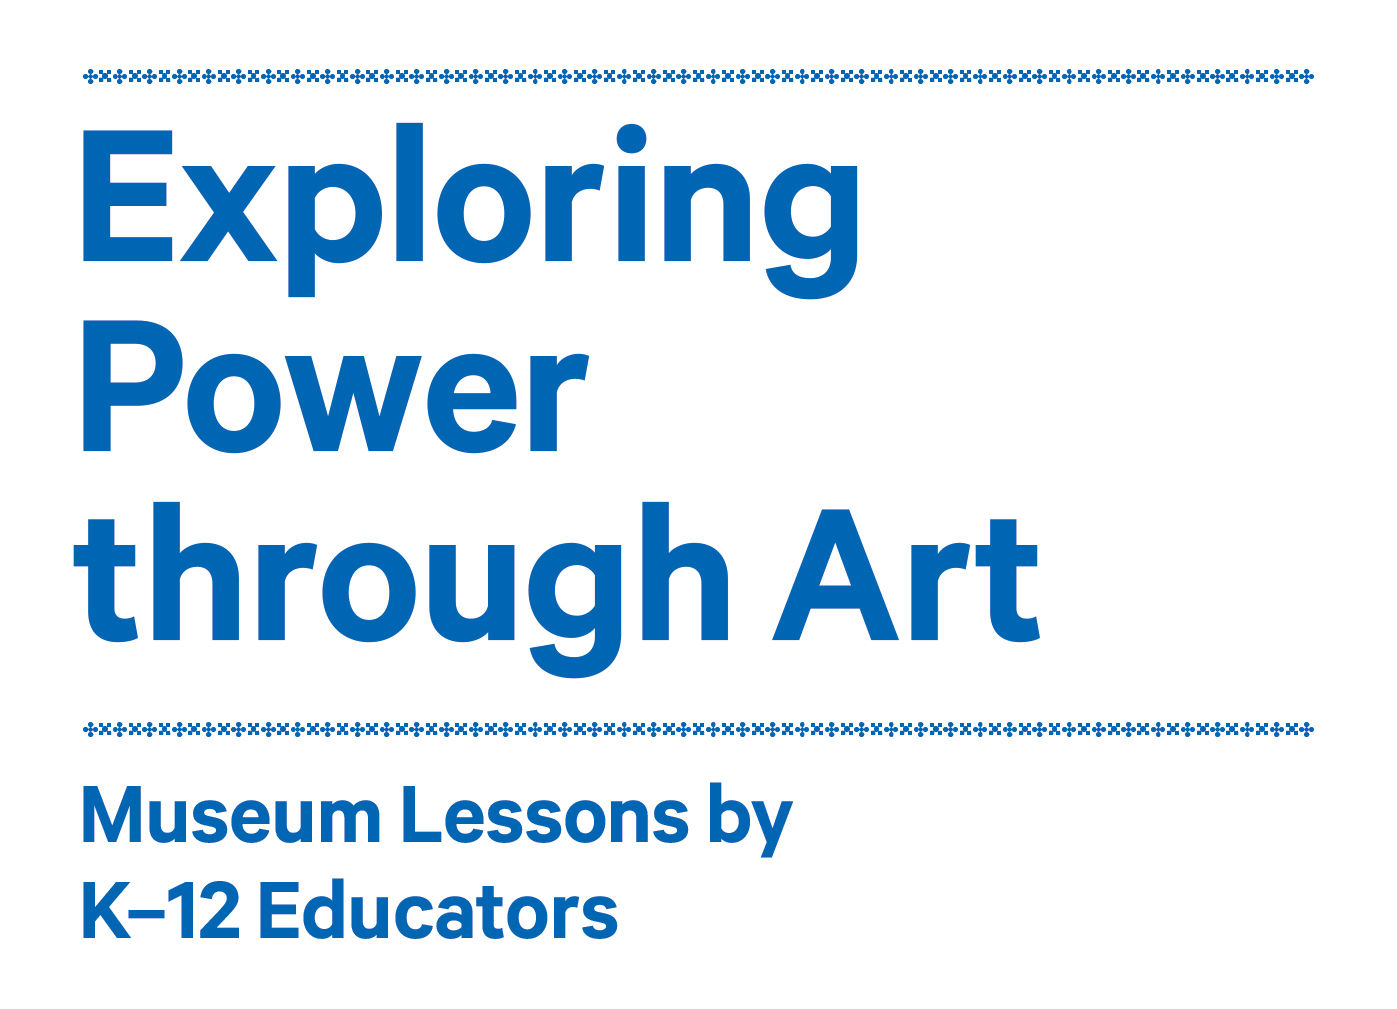 Blue text on white background that reads Exploring Power through Art